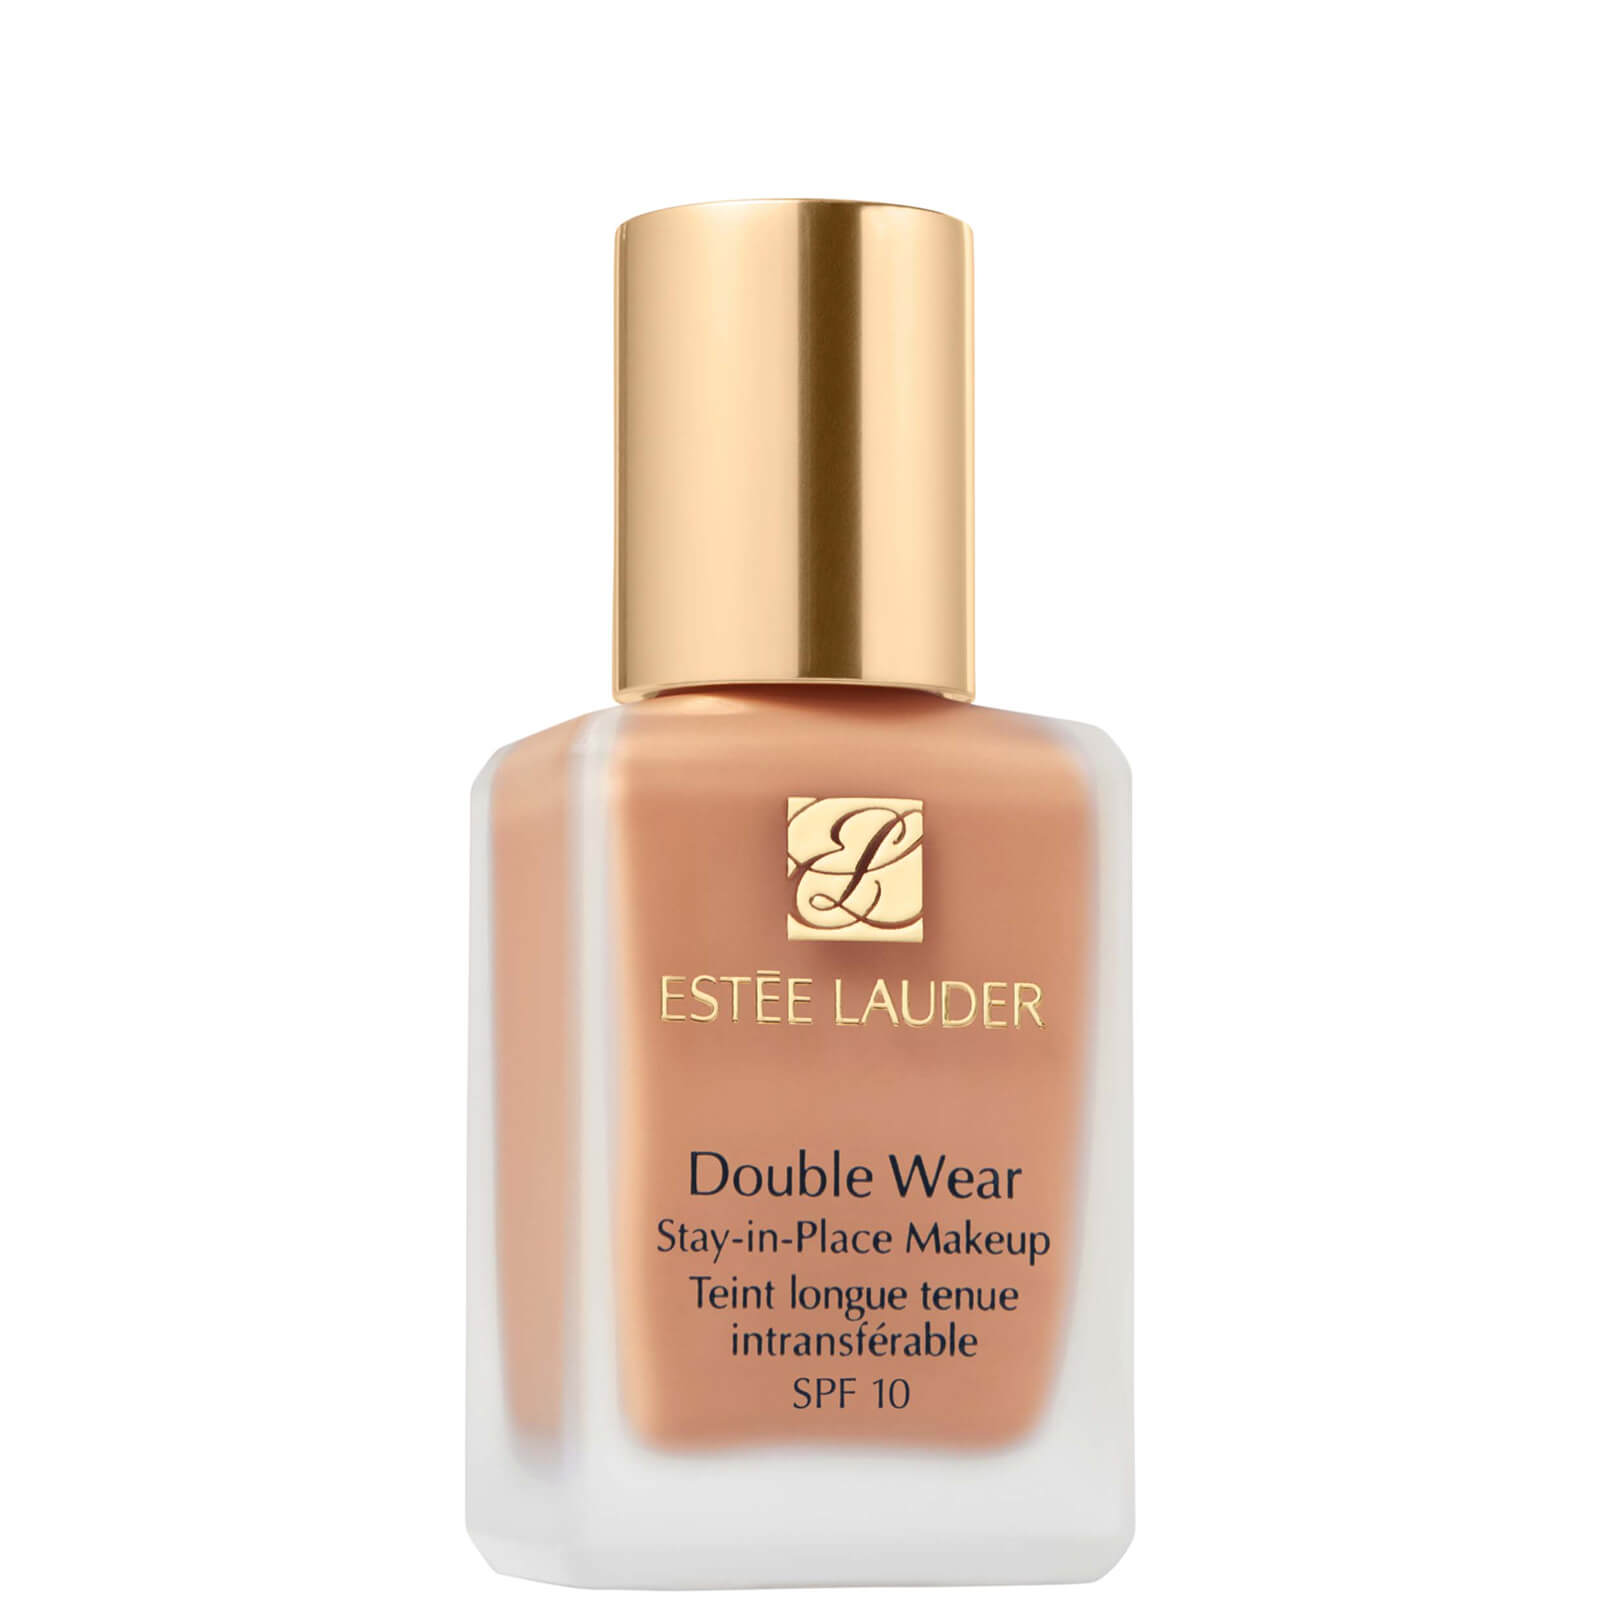 Estee Lauder Double Wear Stay-in-Place Makeup 30ml (Various Shades) - 1C2 Petal